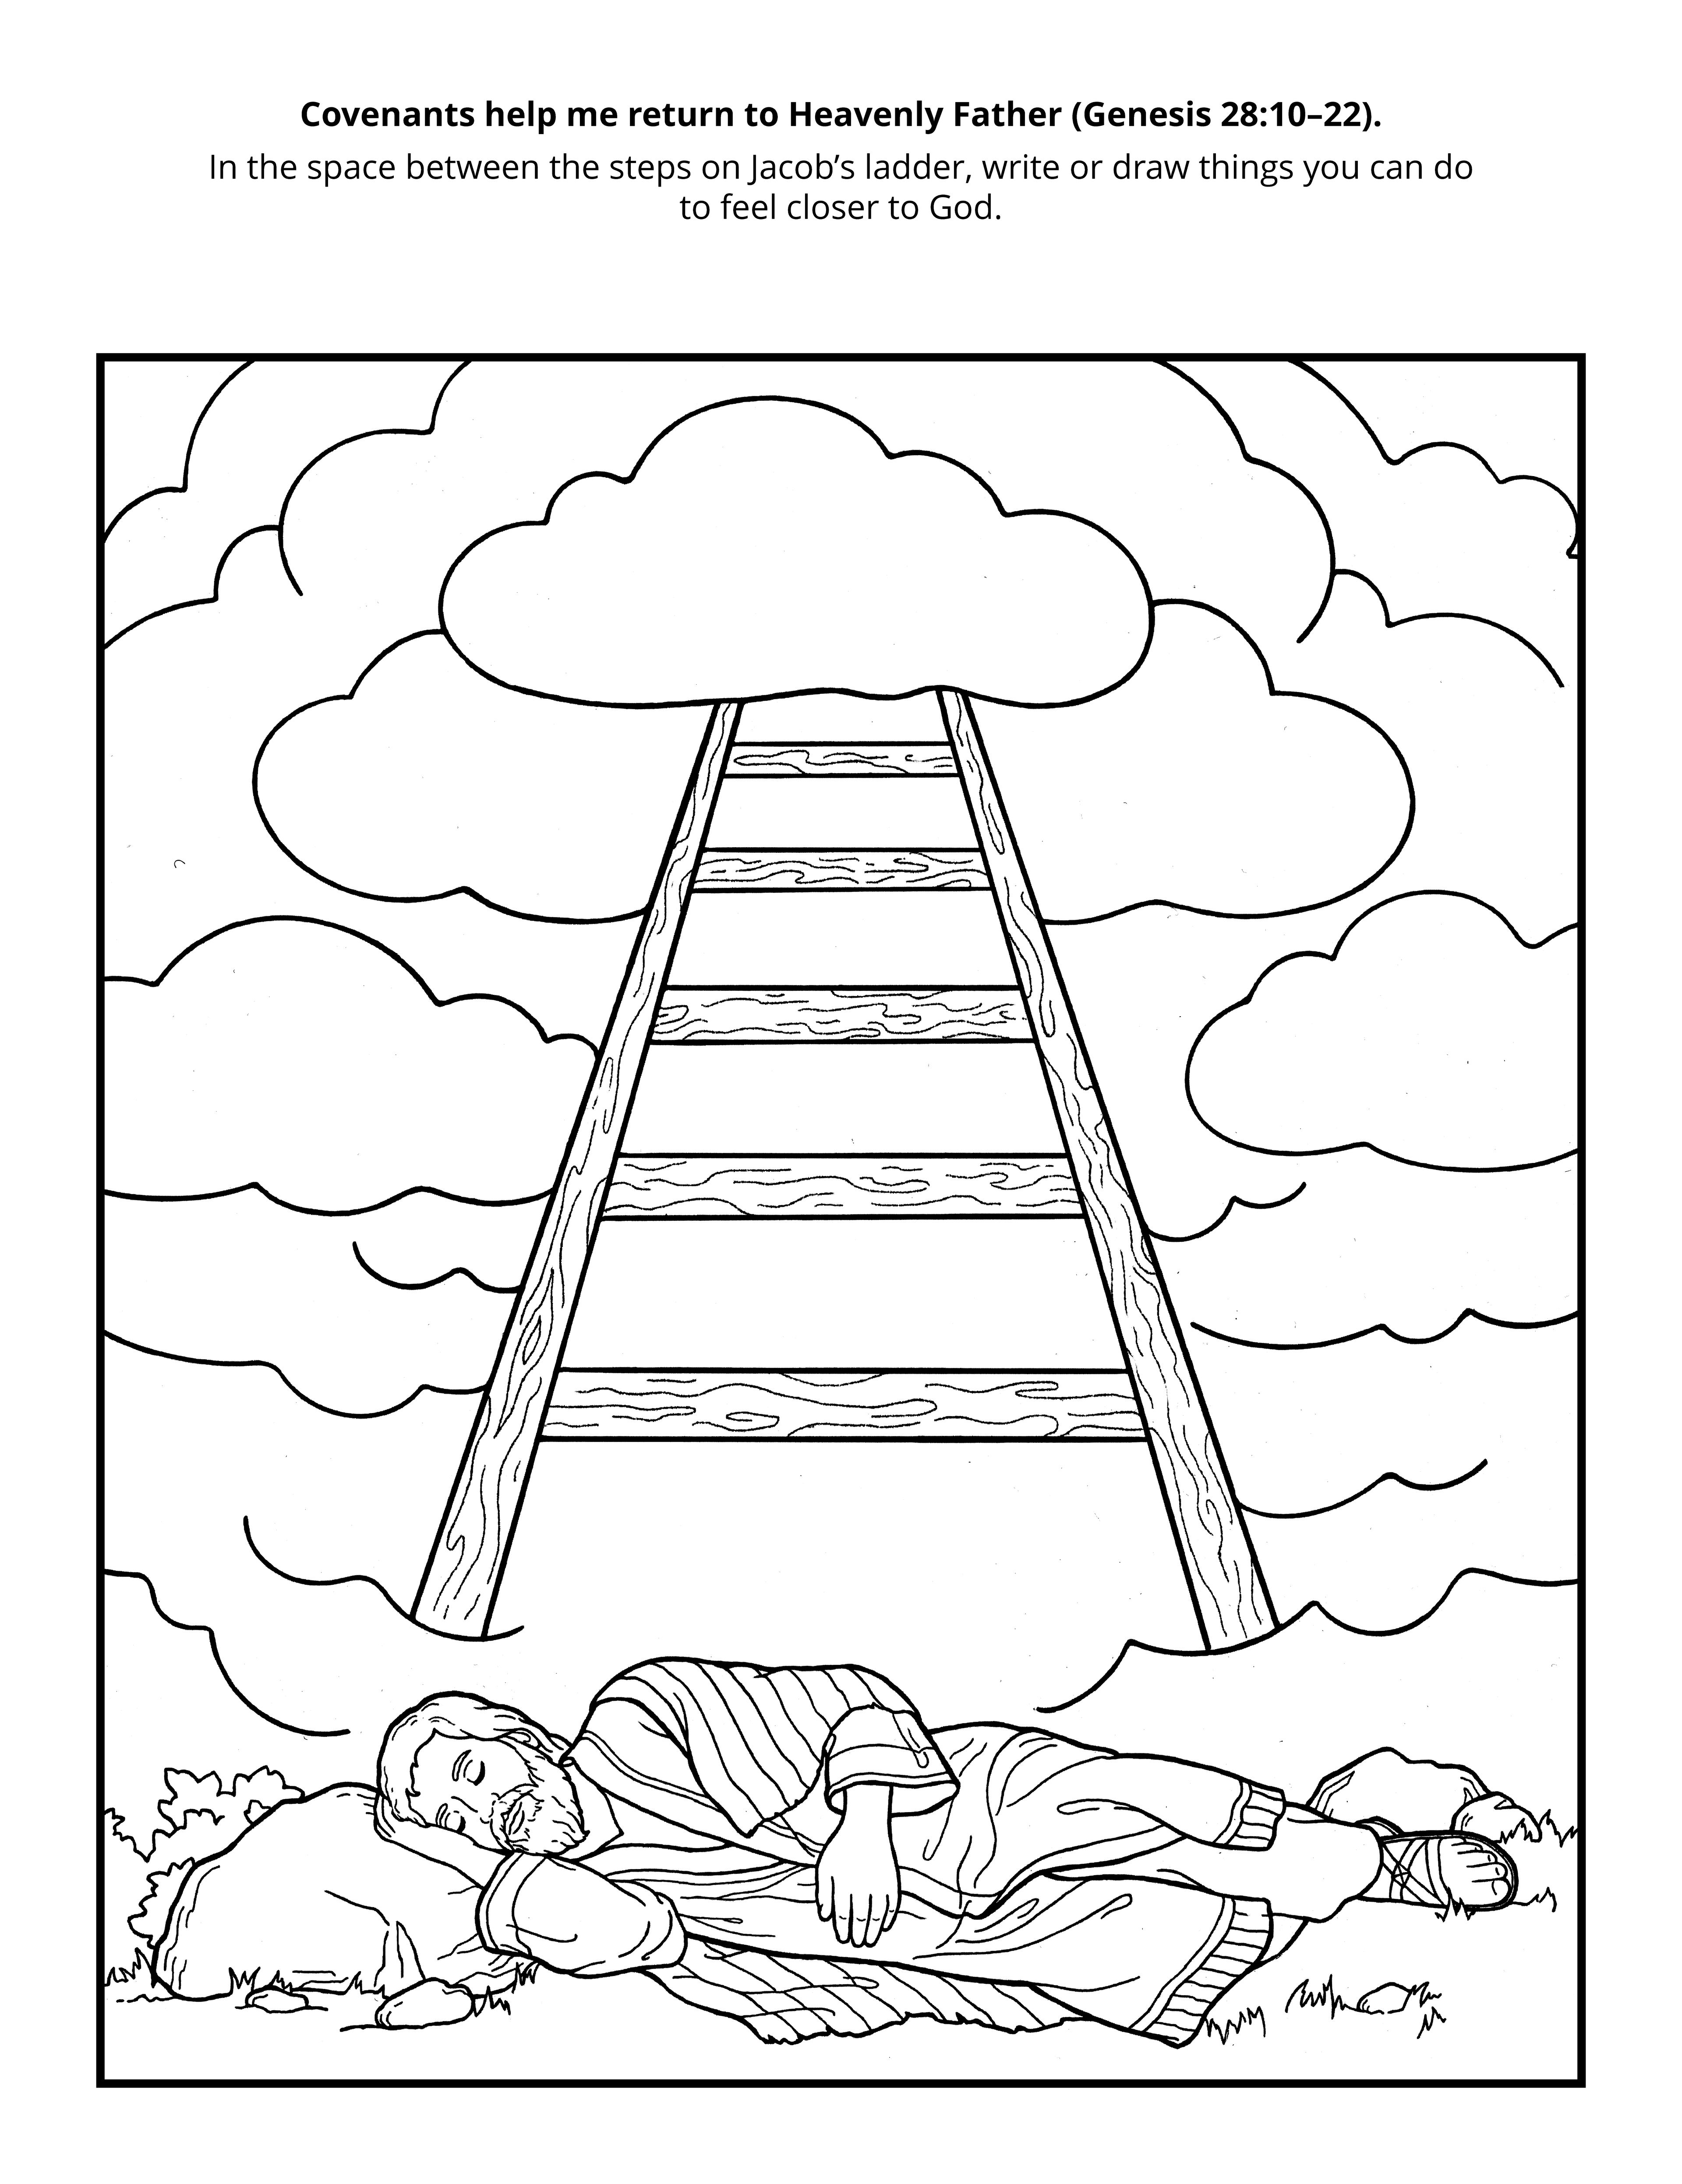 Coloring page for Genesis 28: 10-22